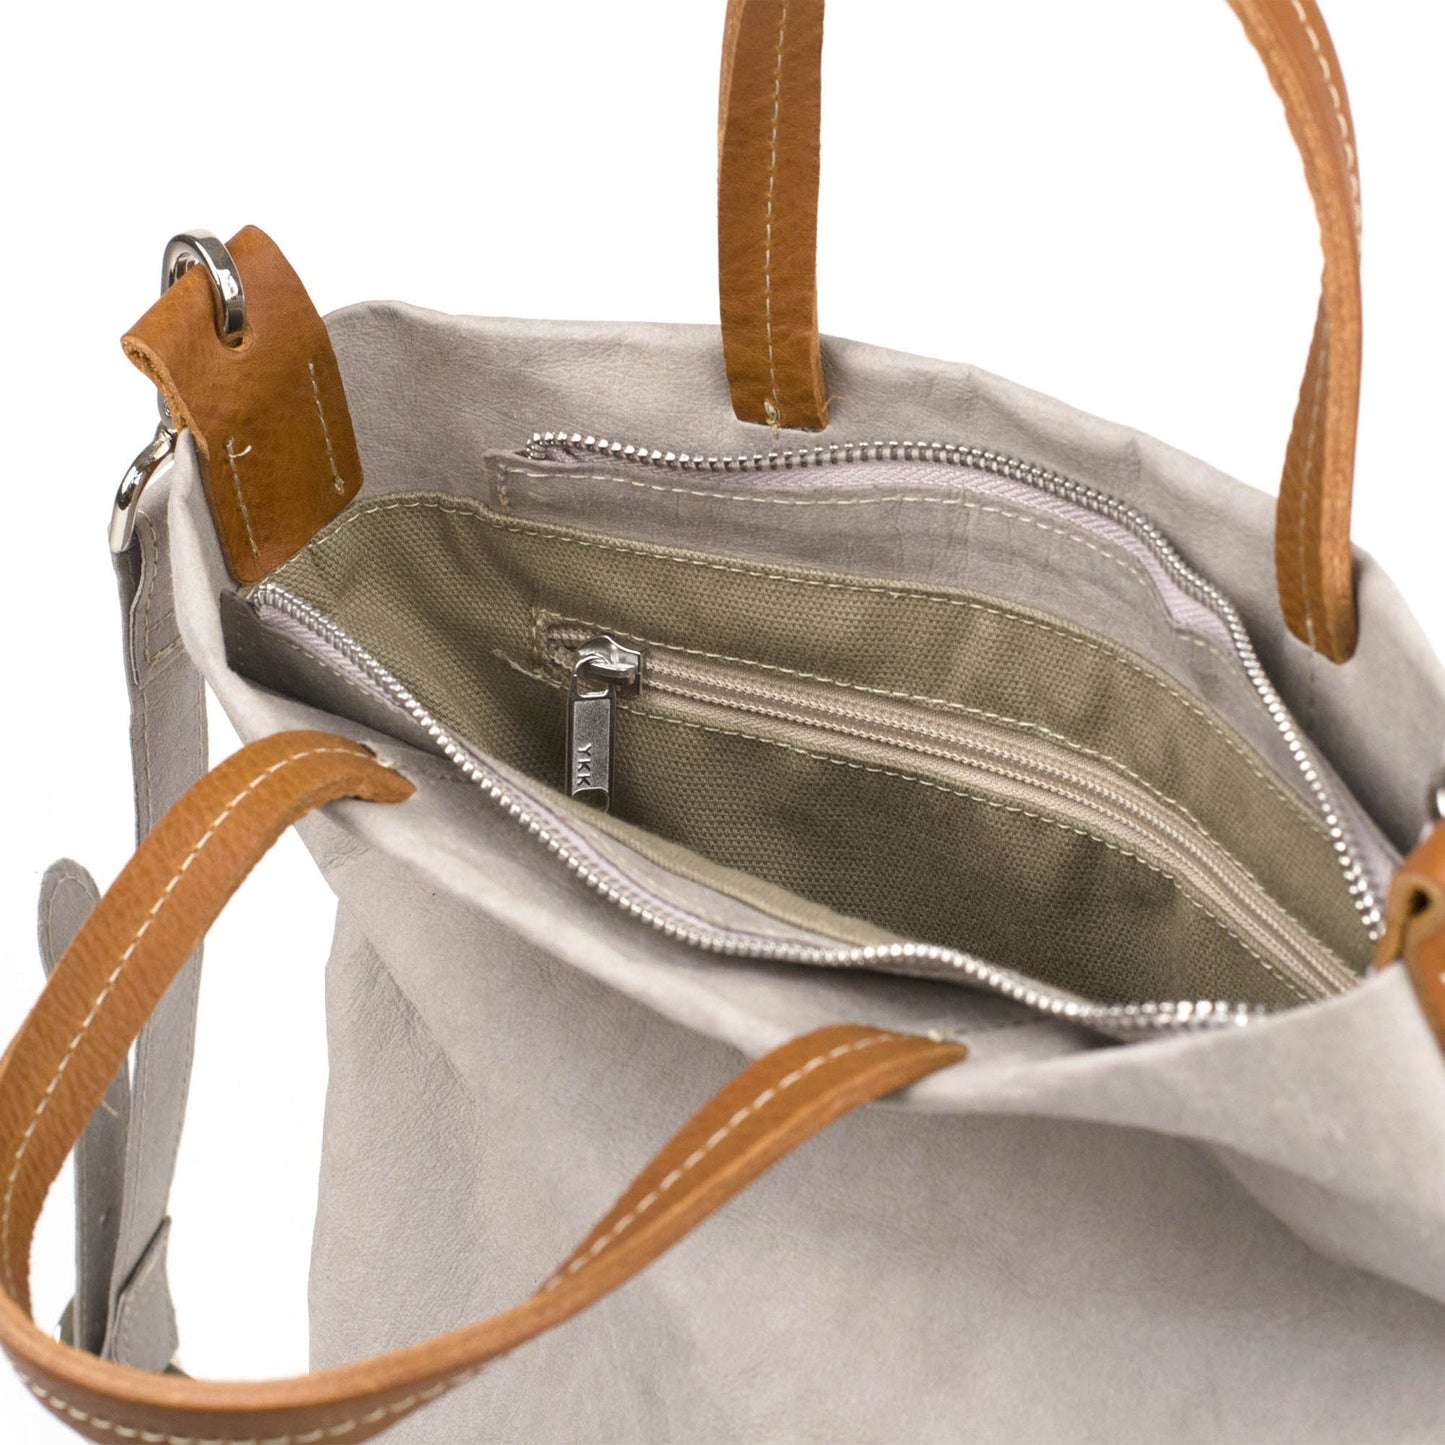 A washable paper tote bag is shown close up and unzipped, revealing an inside zipper pocket. It is beige in colour.